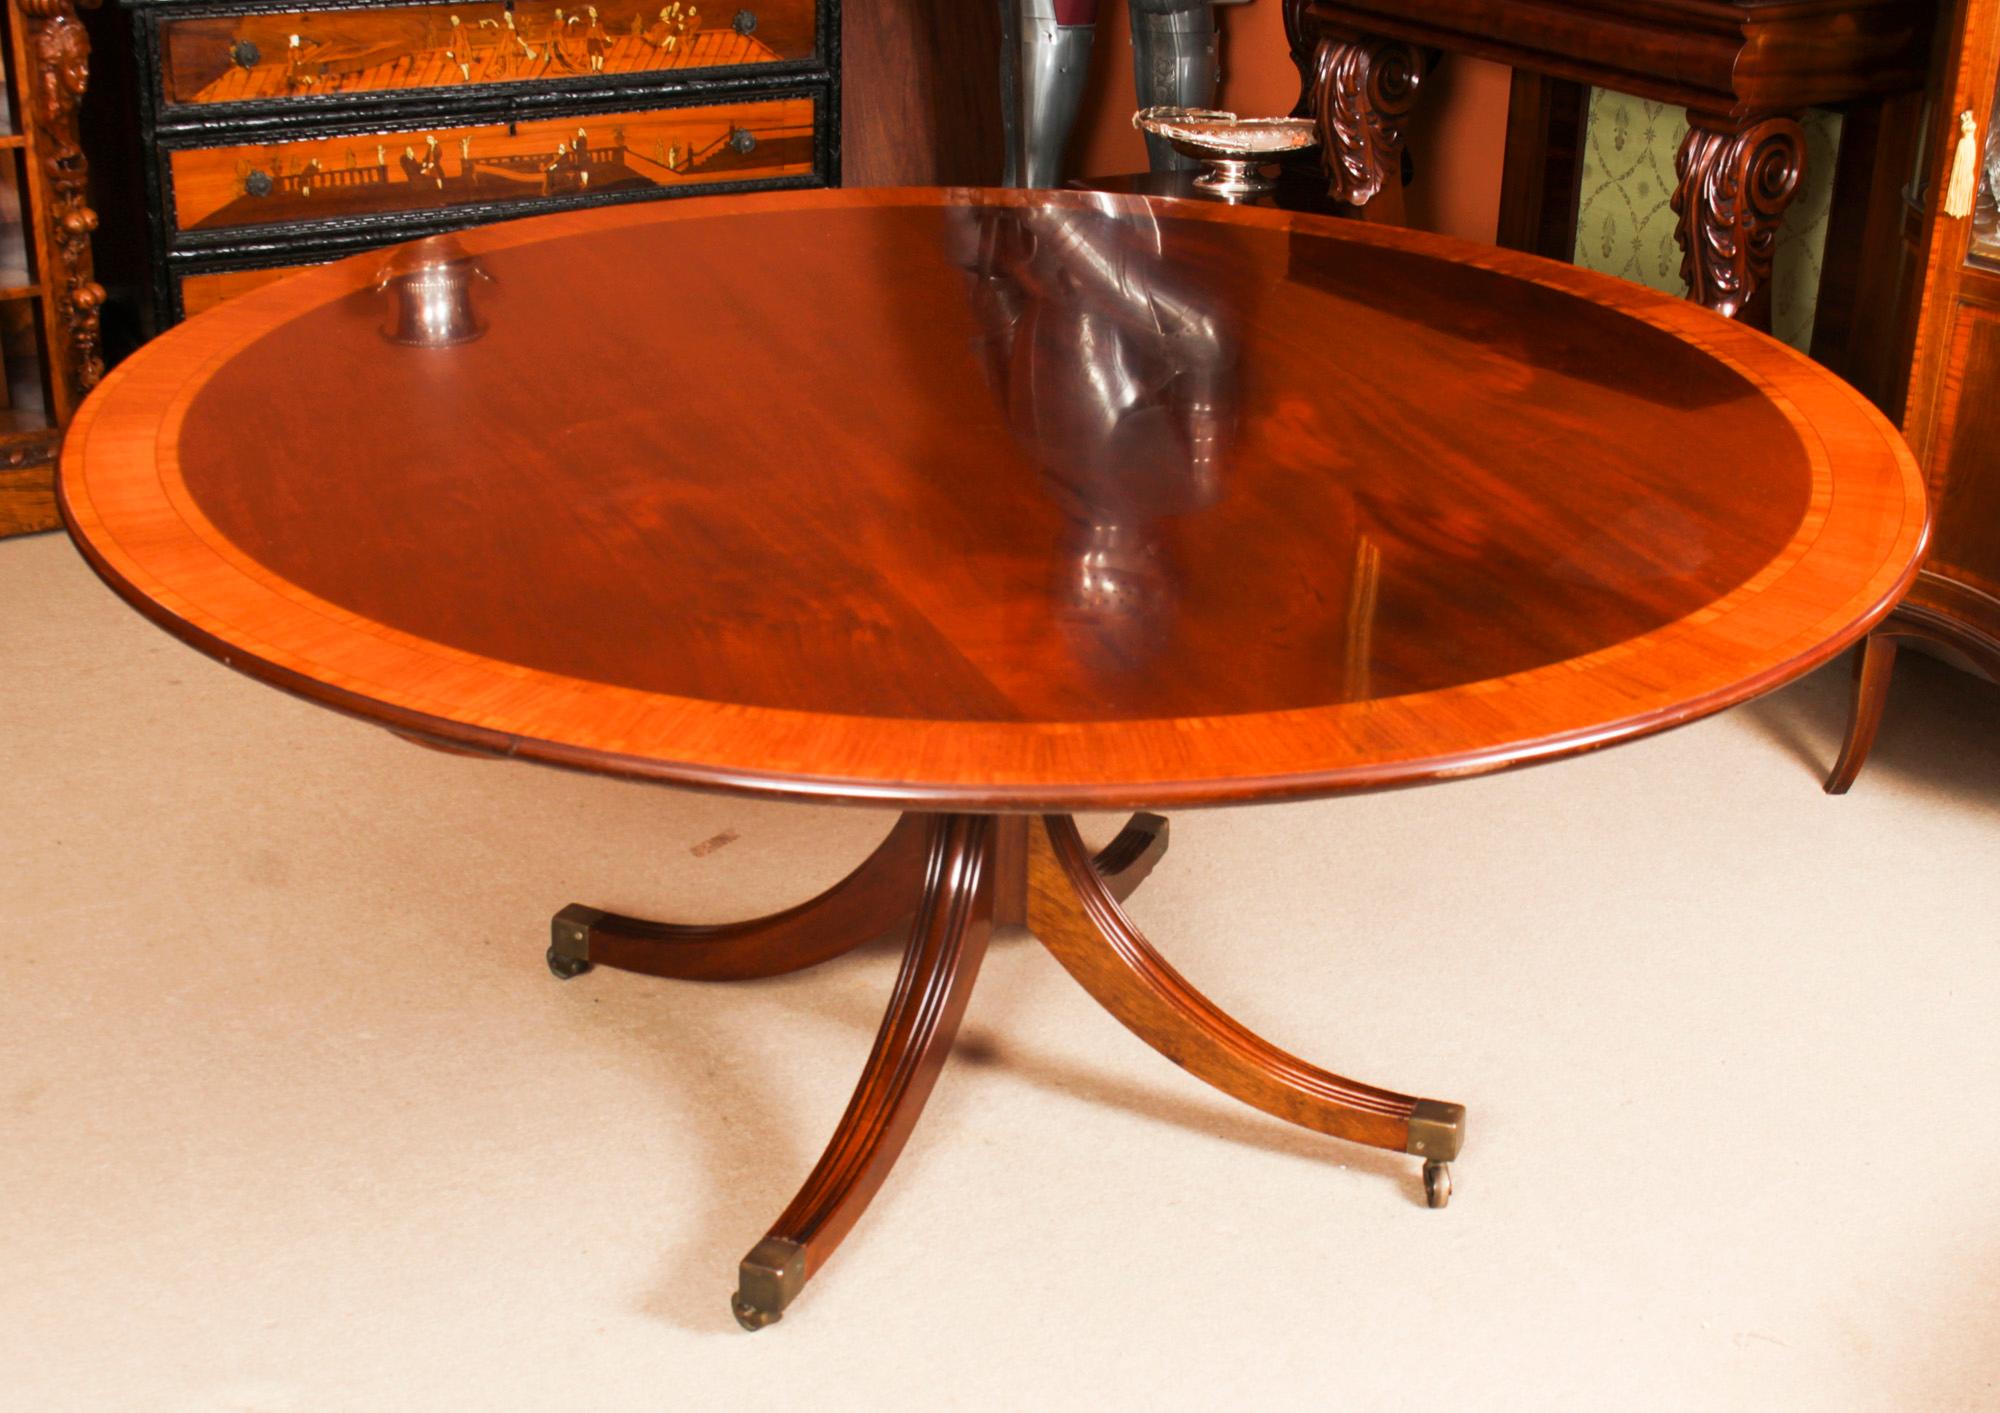 Late 20th Century Vintage Circular Dining Table & 6 Chairs William Tillman, 20th Century